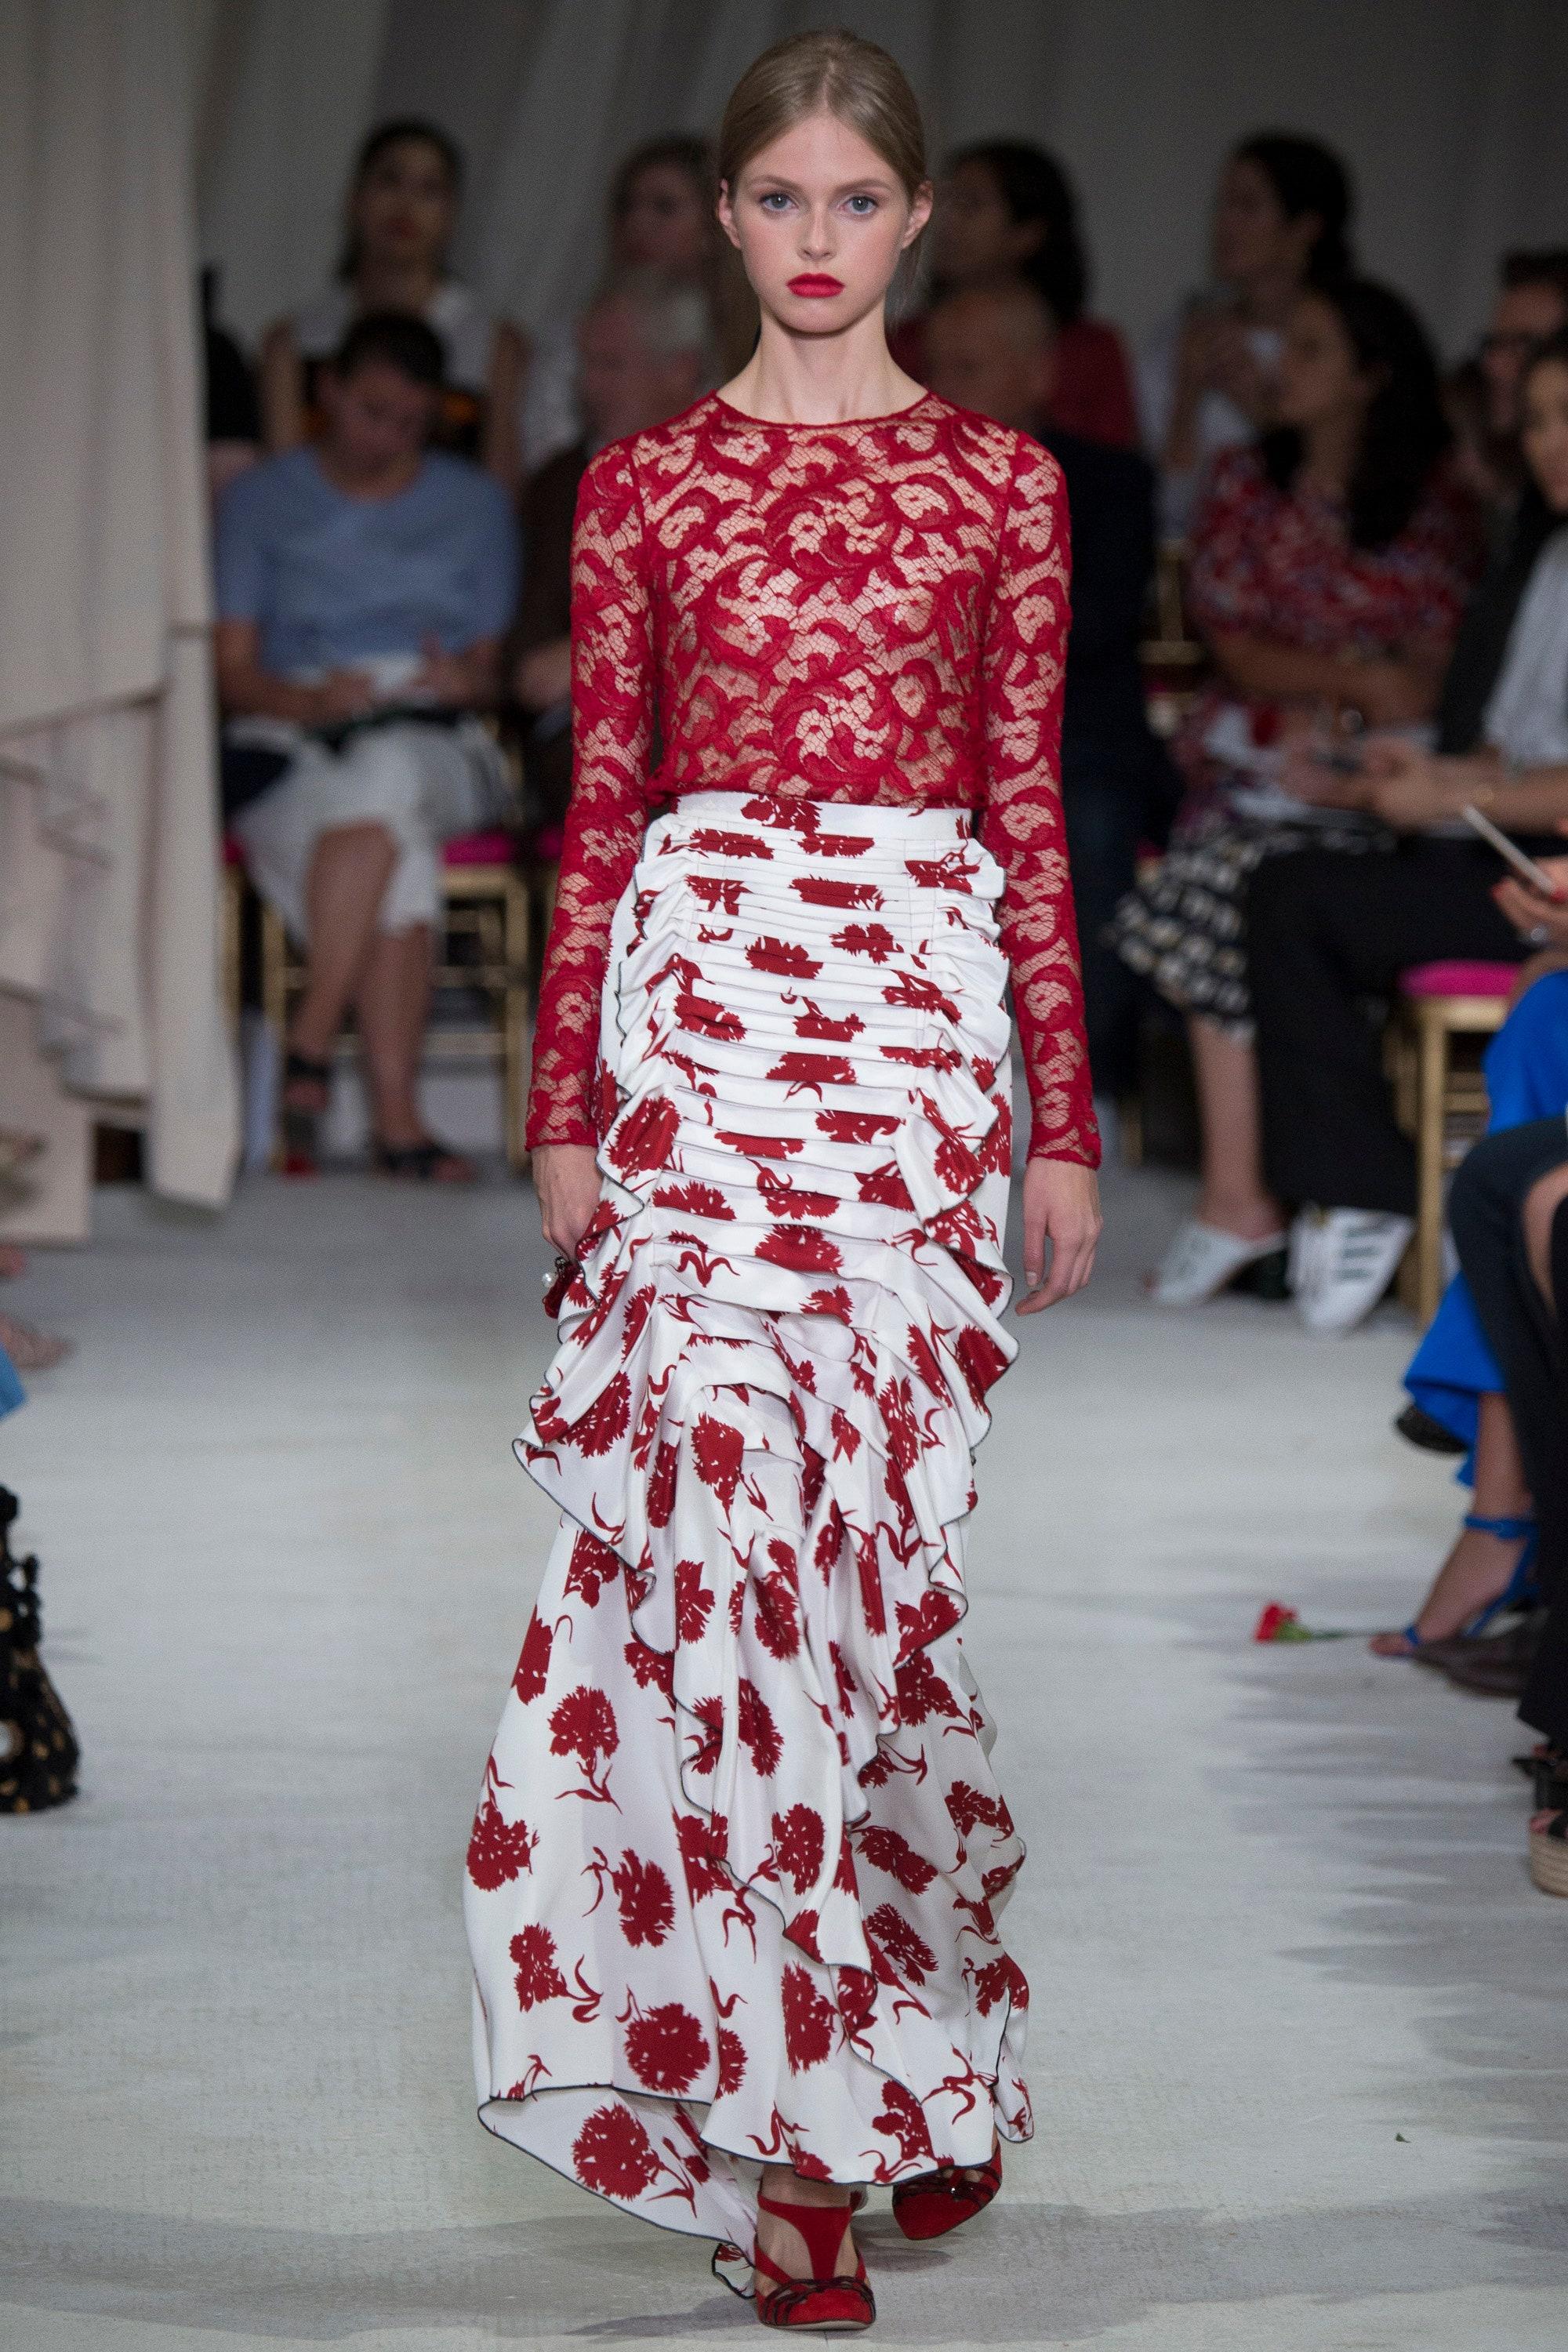 New Oscar De La Renta Silk Flower Print Maxi Skirt
S/S 2016 Runway Collection
Sample - no size tag - please check measurements. 
White with Burgundy Flowers, Ruffled and Pleated Accent, Finished with Black Piping, Back Zip Closure.
Measurements: